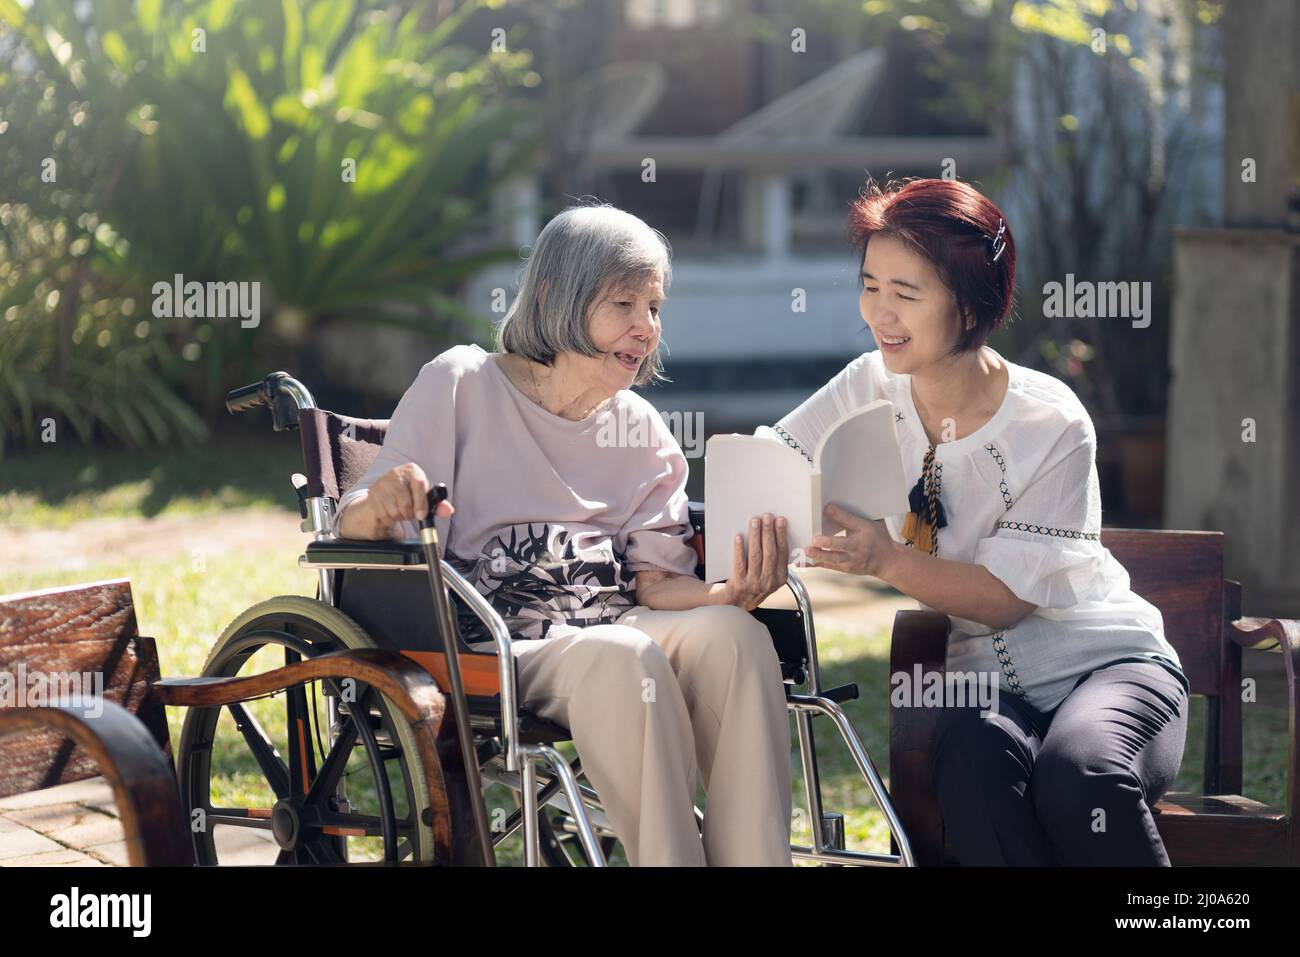 Elderly woman and daughter reading a book together in backyard. Stock Photo